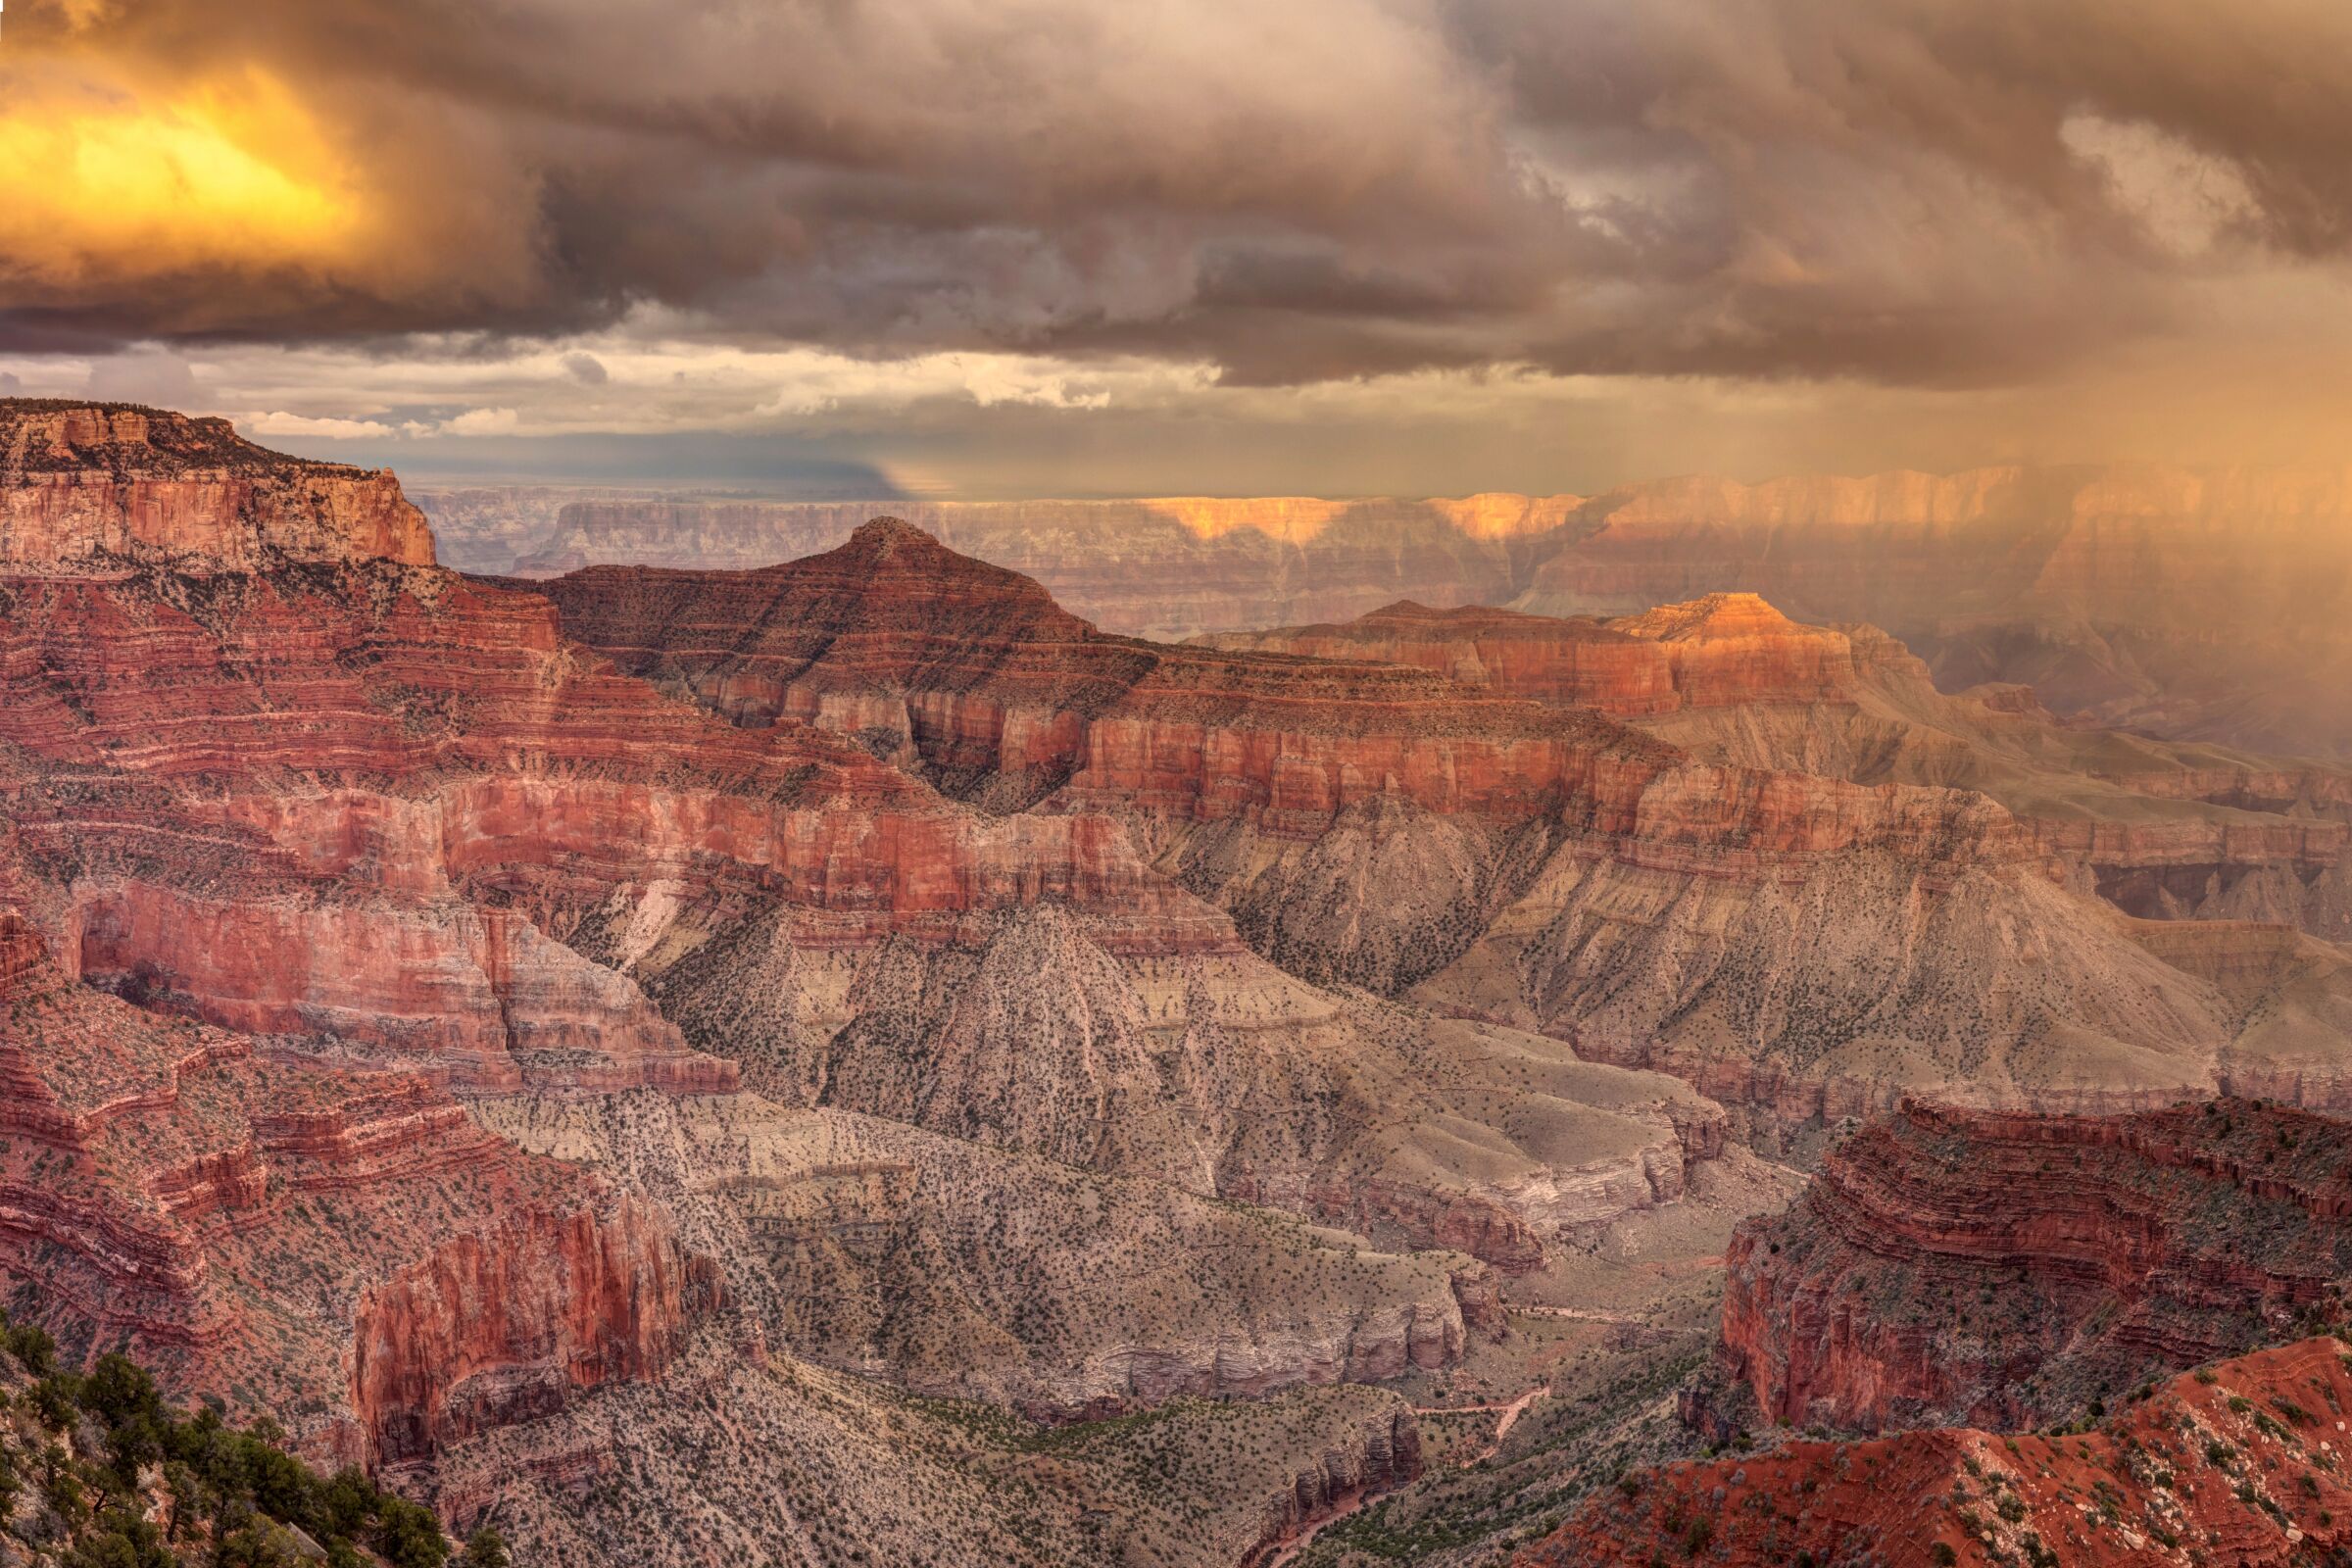 Clouds, rain and a rainbow create a dramatic sky and scenery at seen from the North Rim of Grand Canyon National Park.